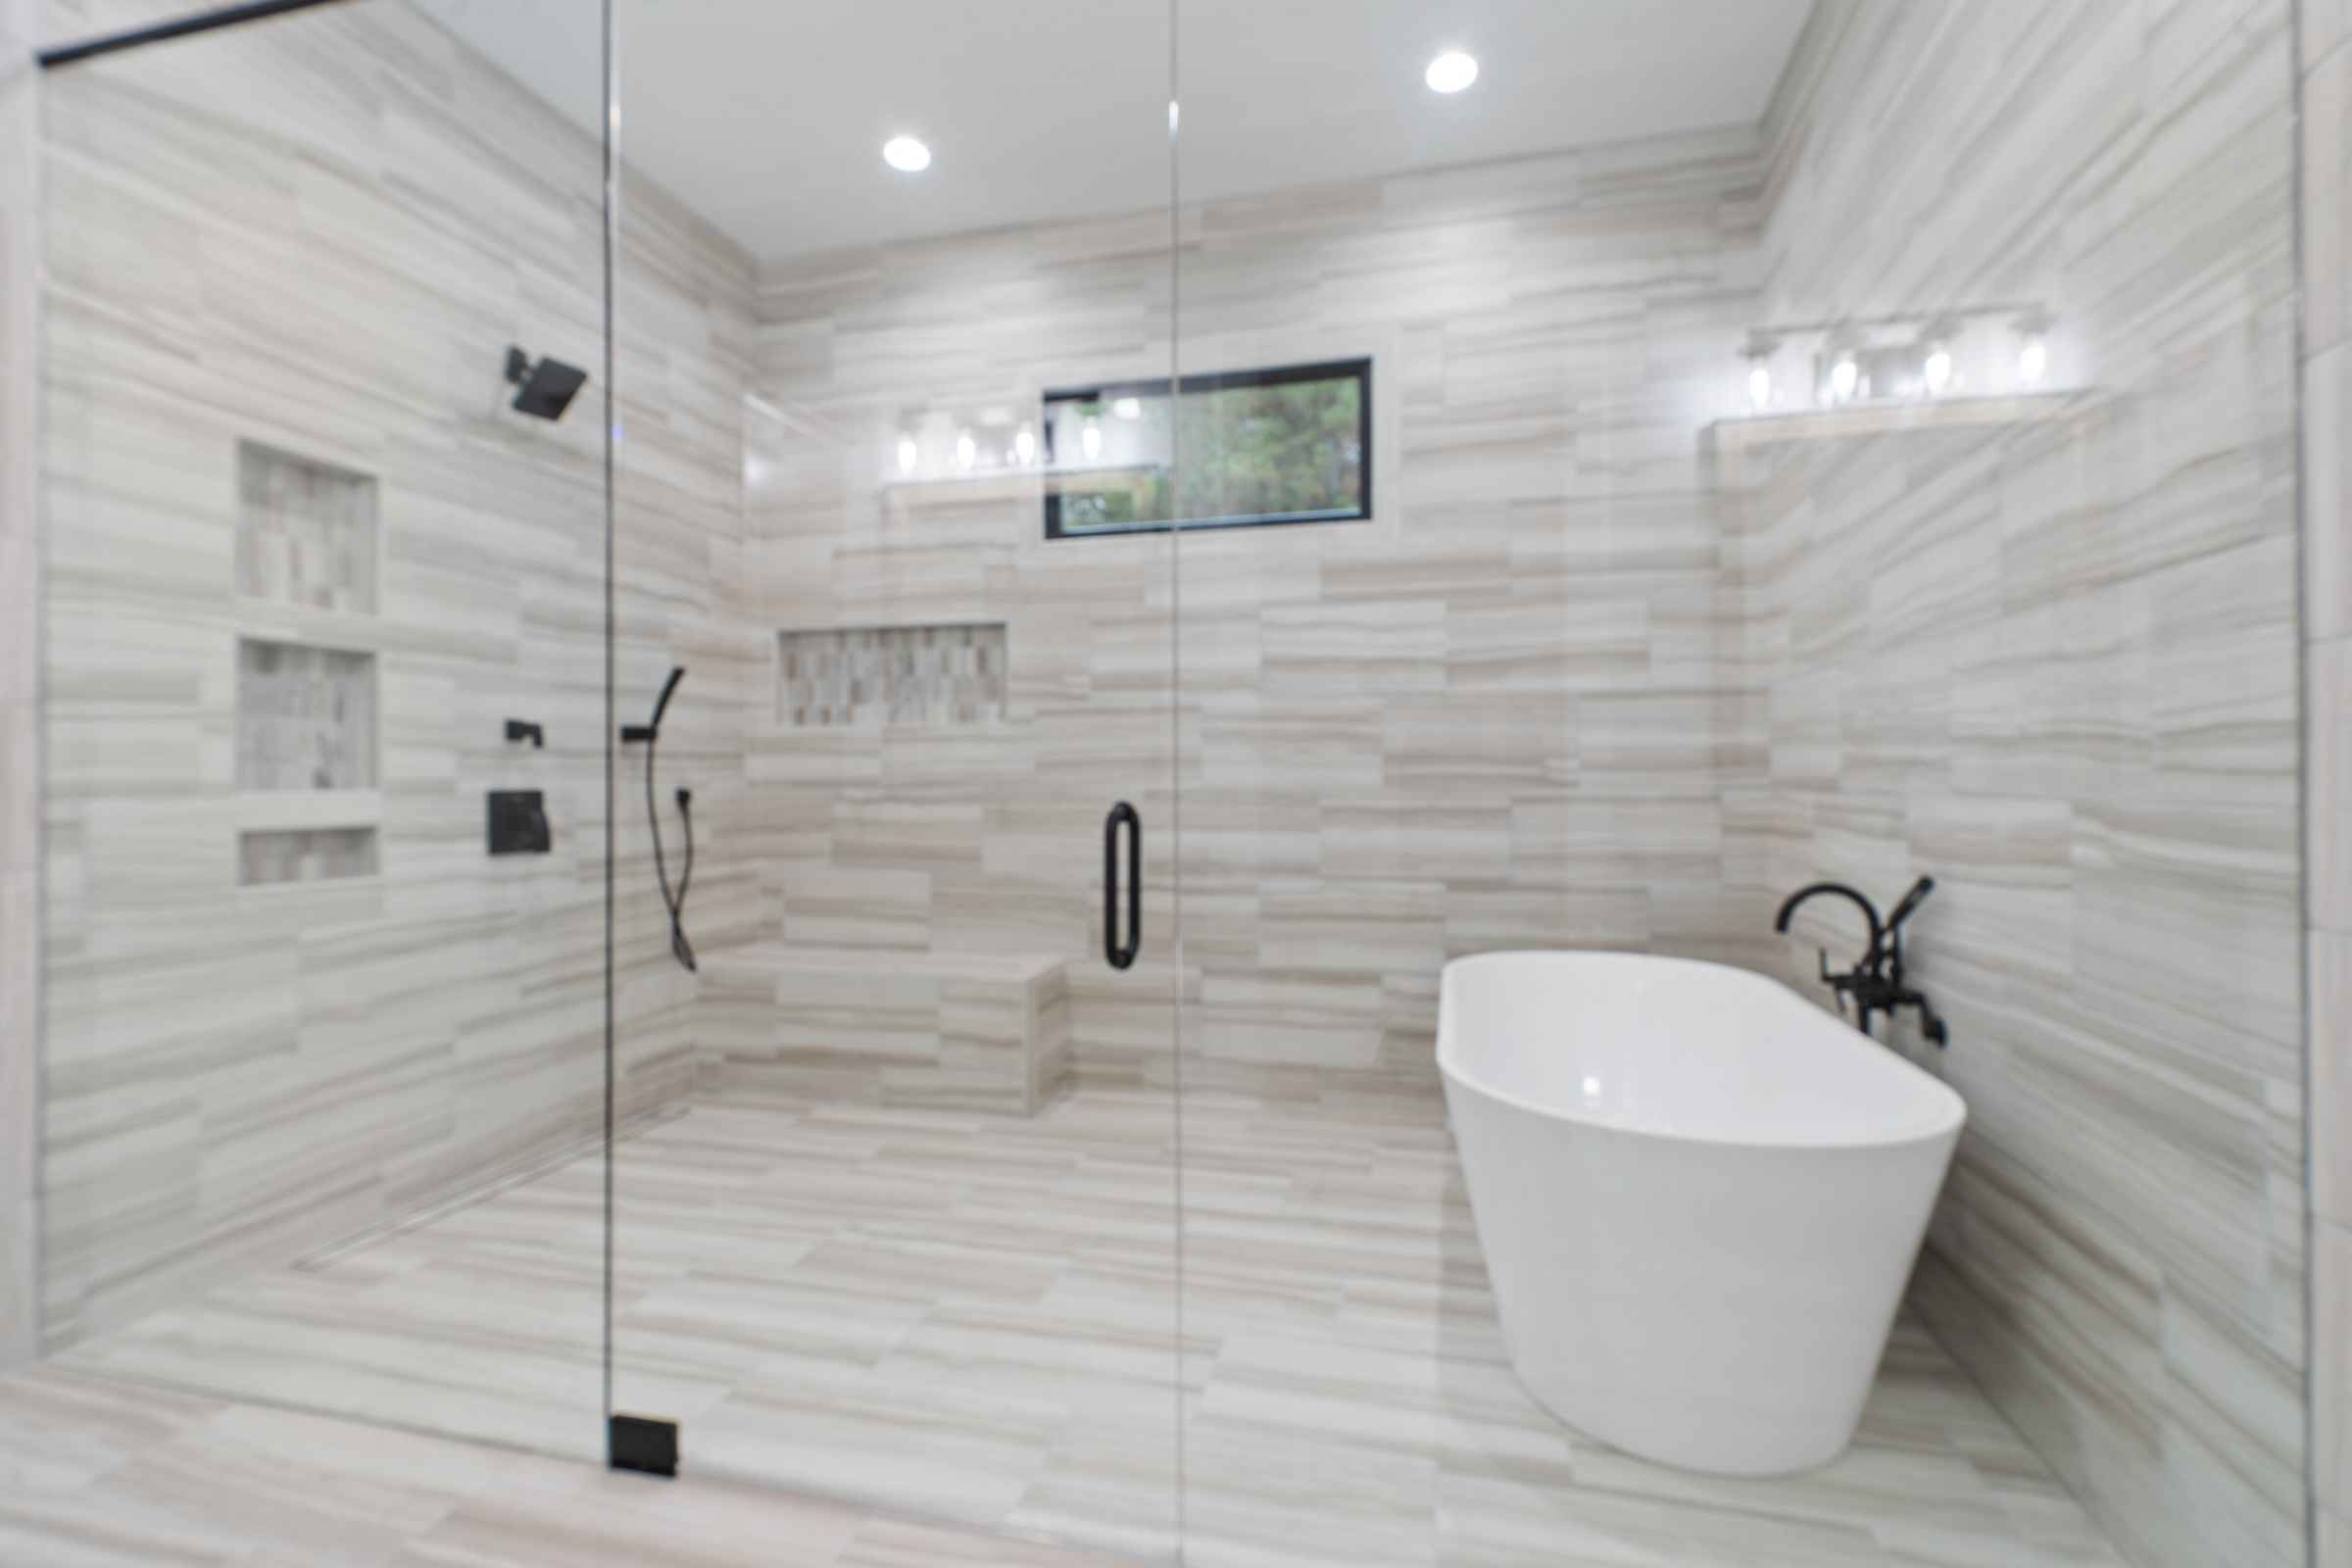 Paxis Indian Trail Master bathroom with walk-in spa shower area with standing tub | Paxisgroup